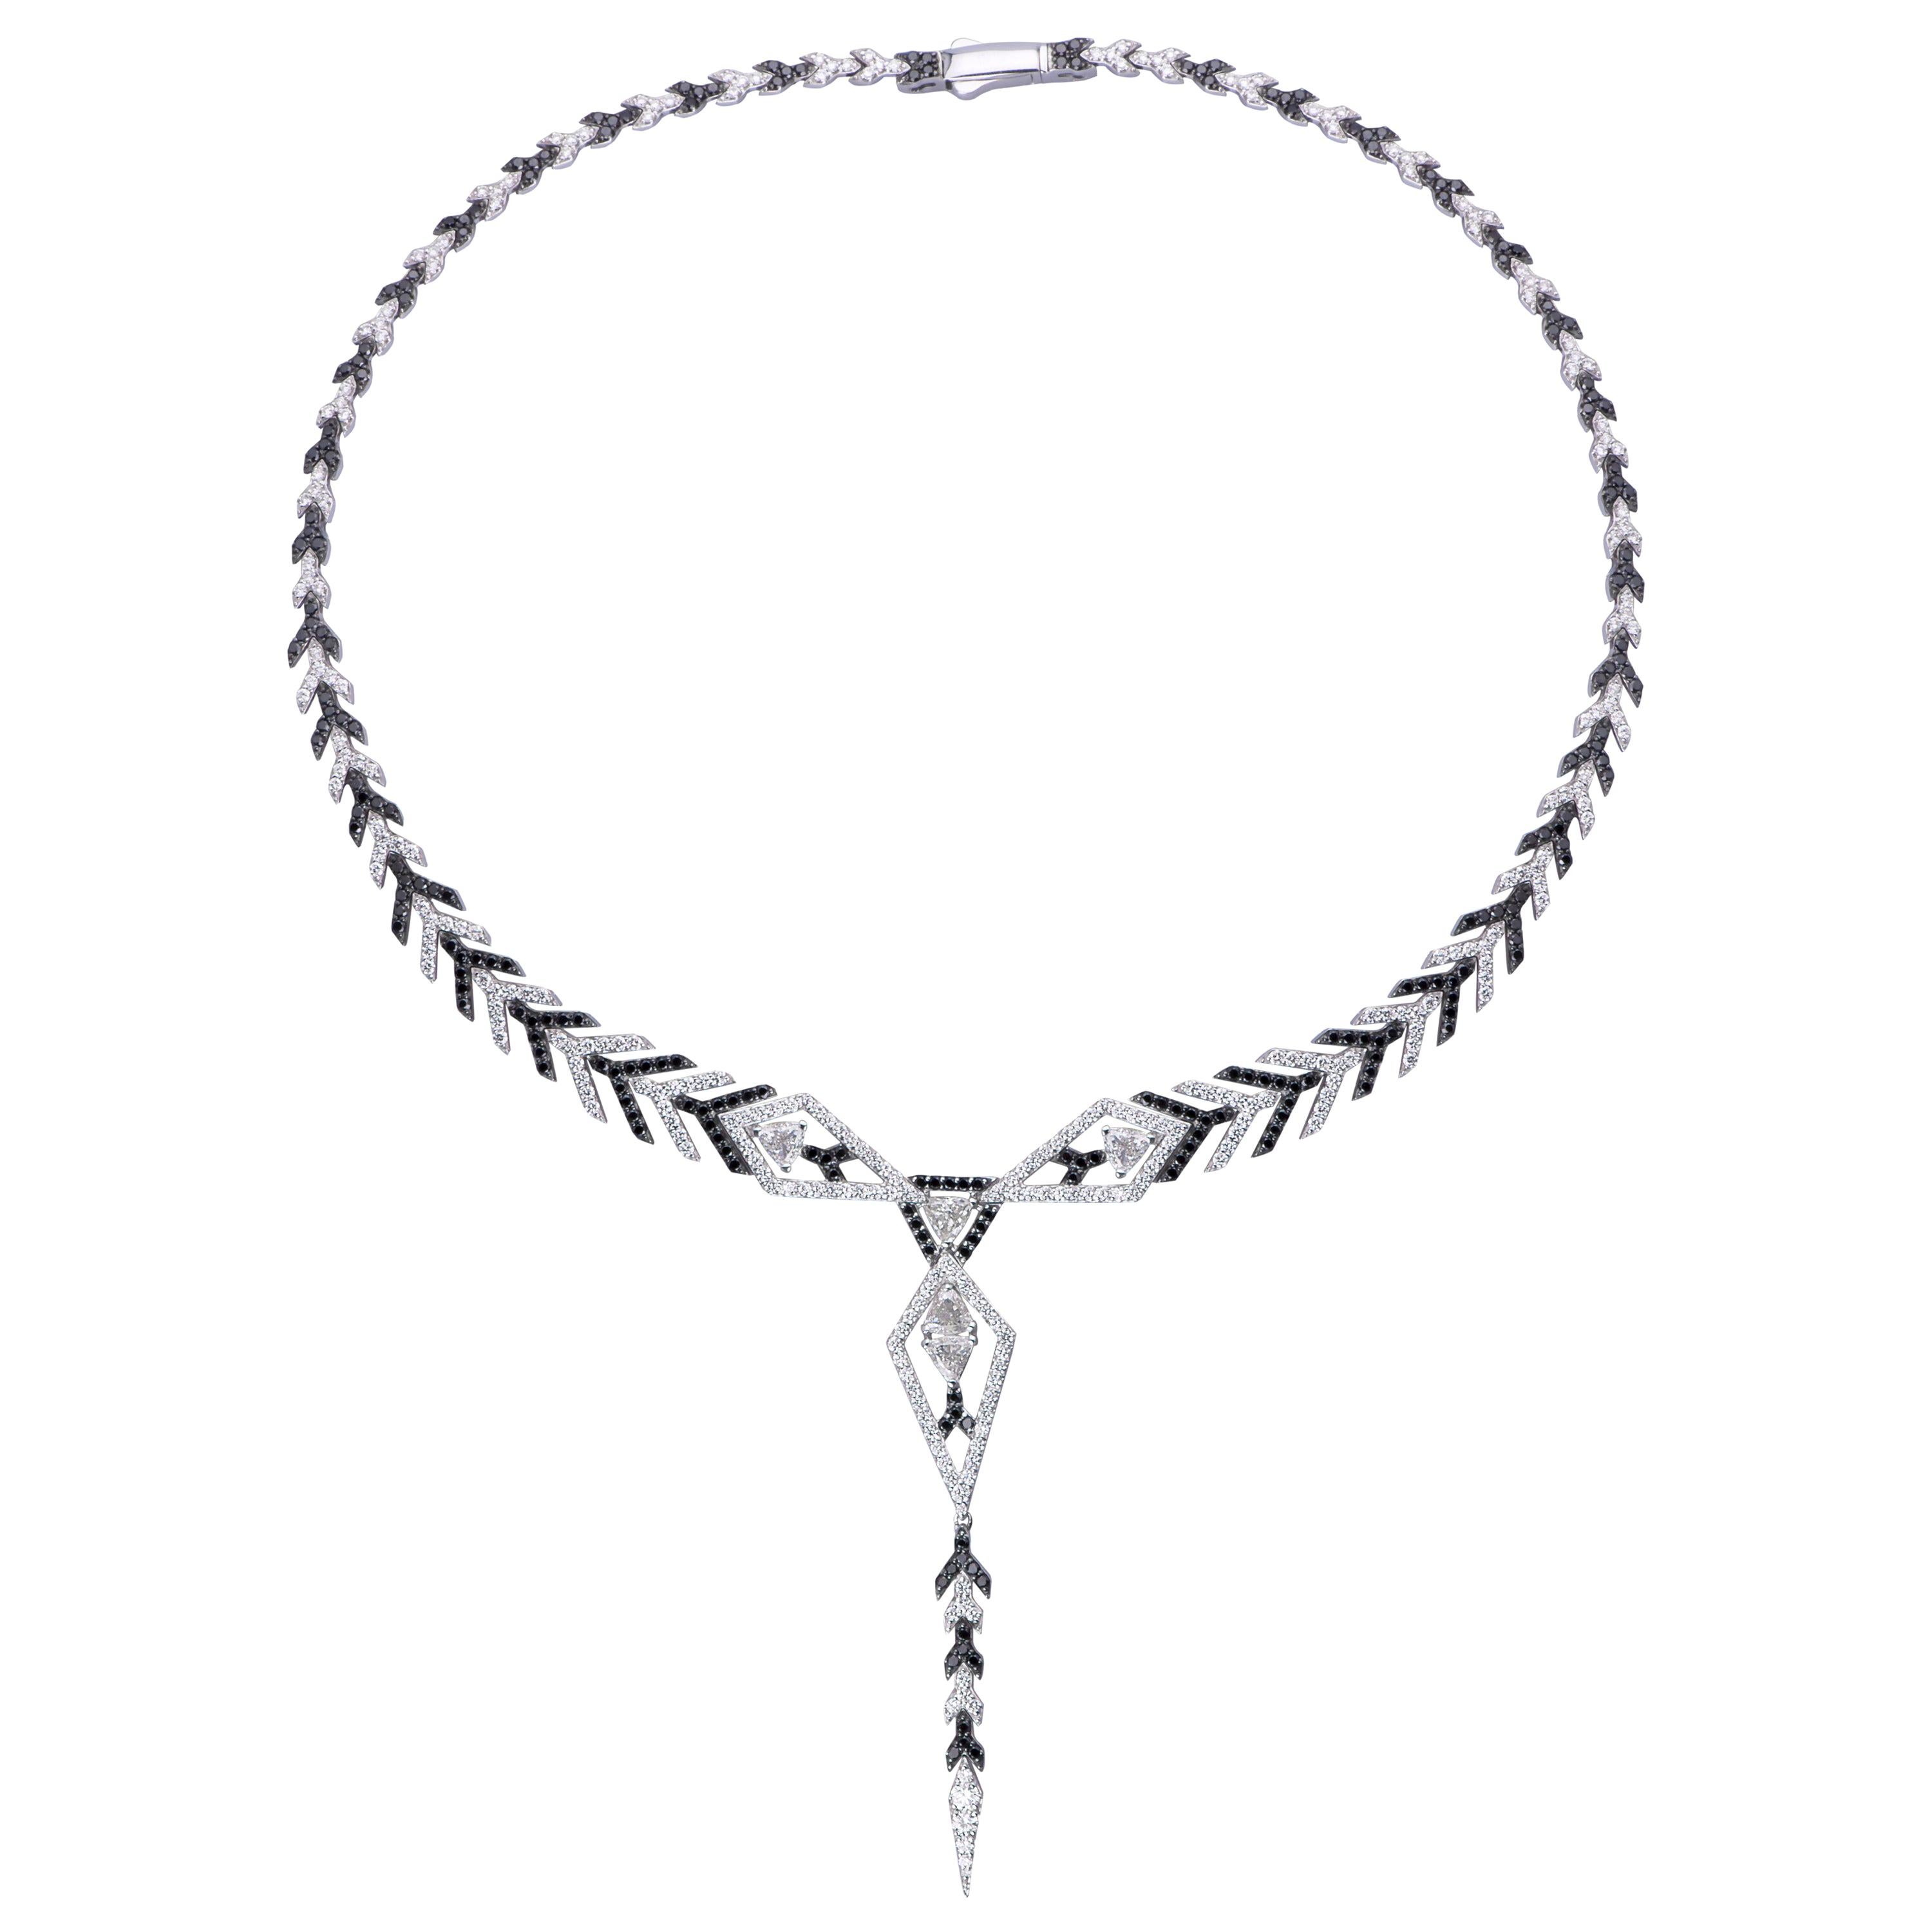 18k Gold and 4.66 Carat Black 5.56 Carat White Diamonds Arrow Necklace by Alessa For Sale